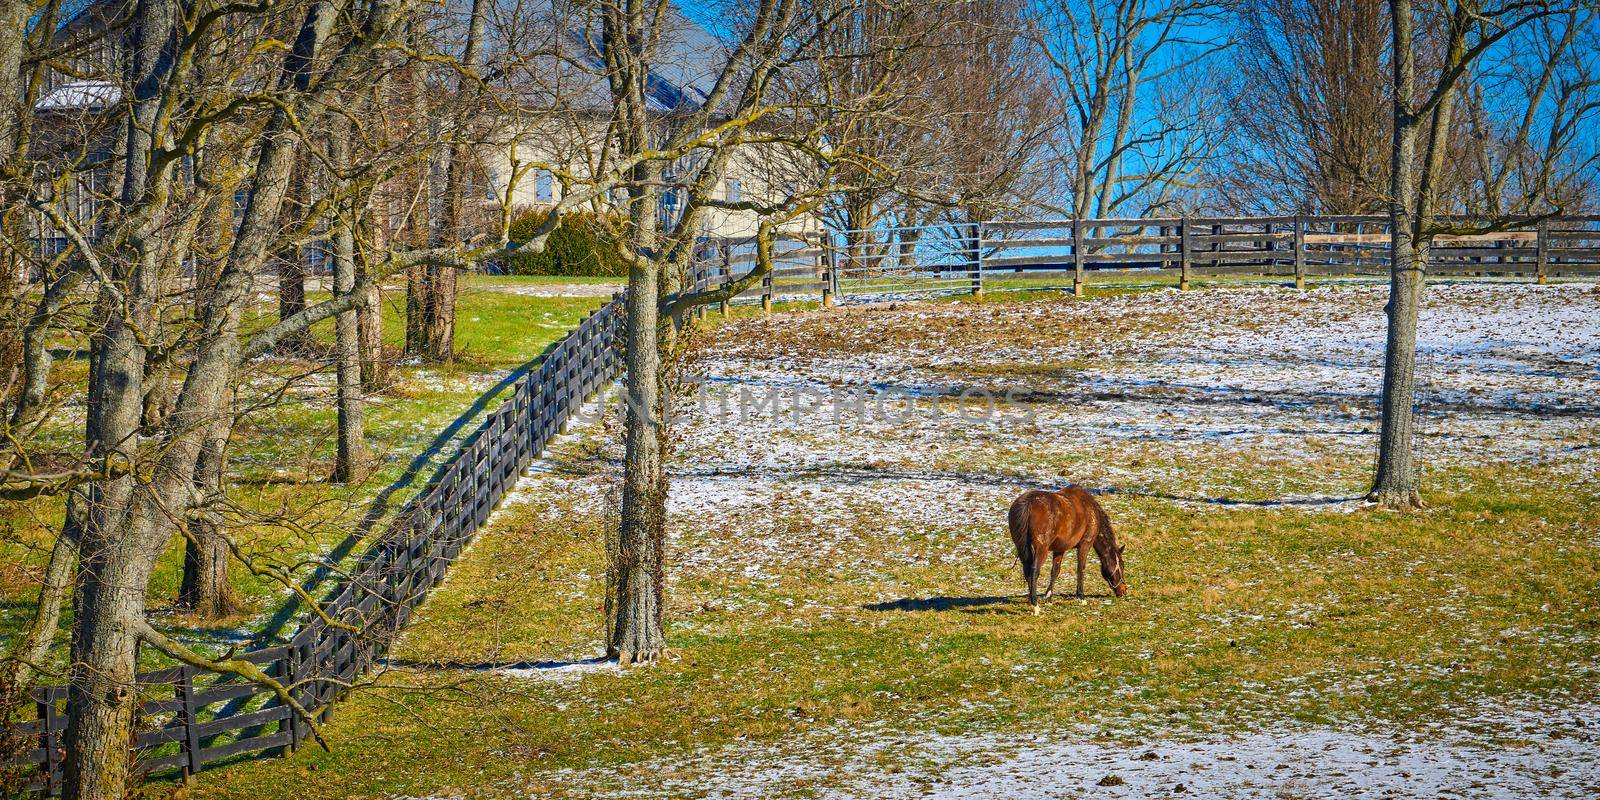 Thoroughbred horse gazing in a winter field with snow.